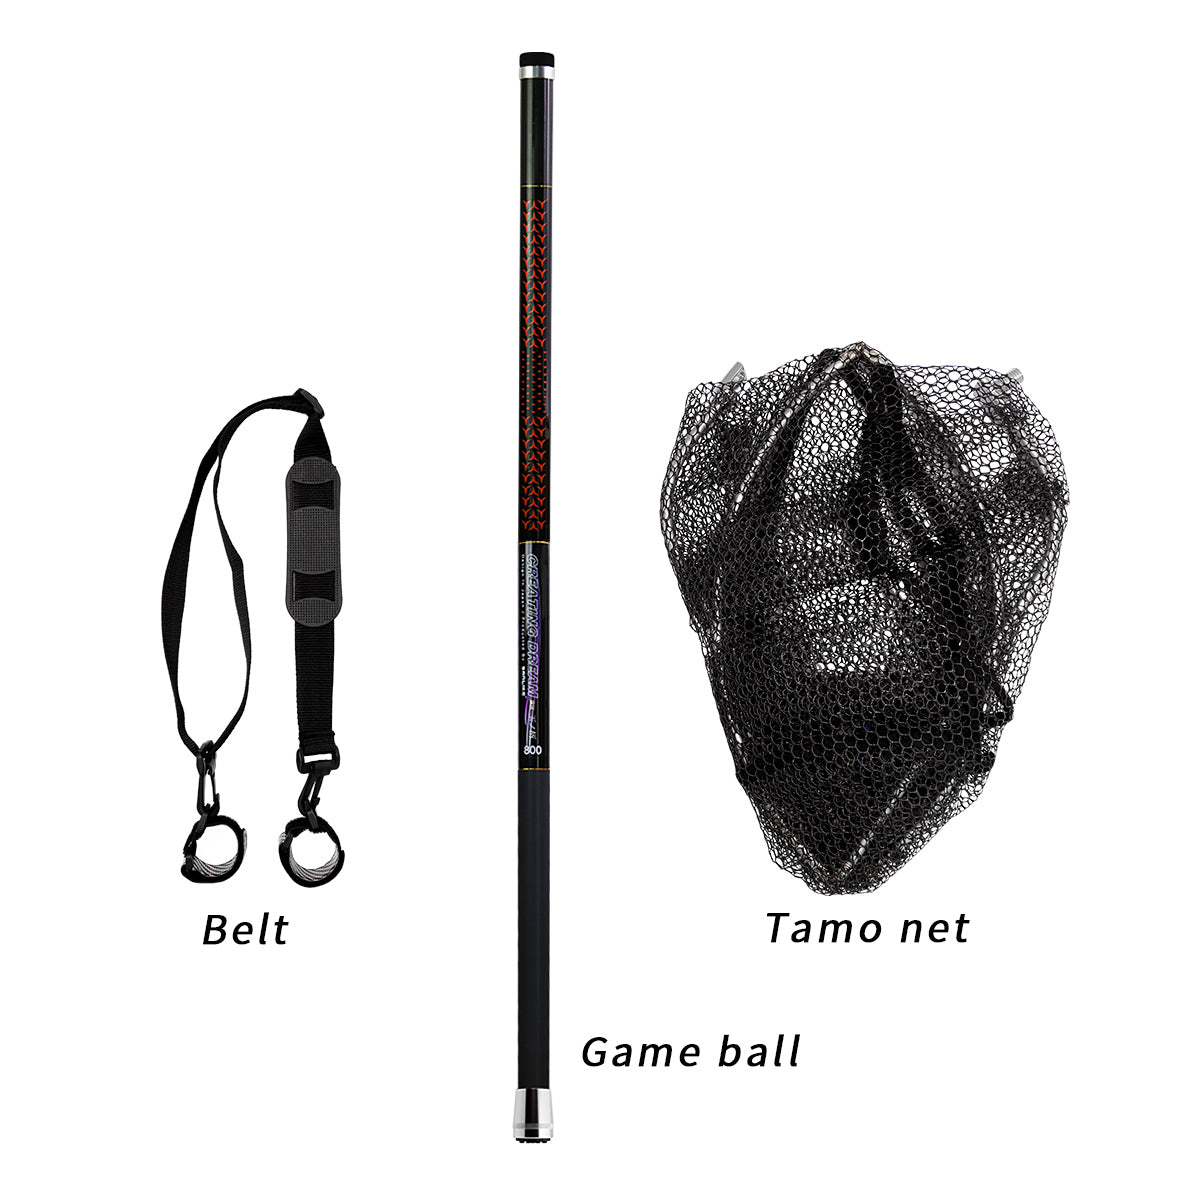 PROX ALL IN ONE Salt AIOS Telescopic Landing Net Pole size variations